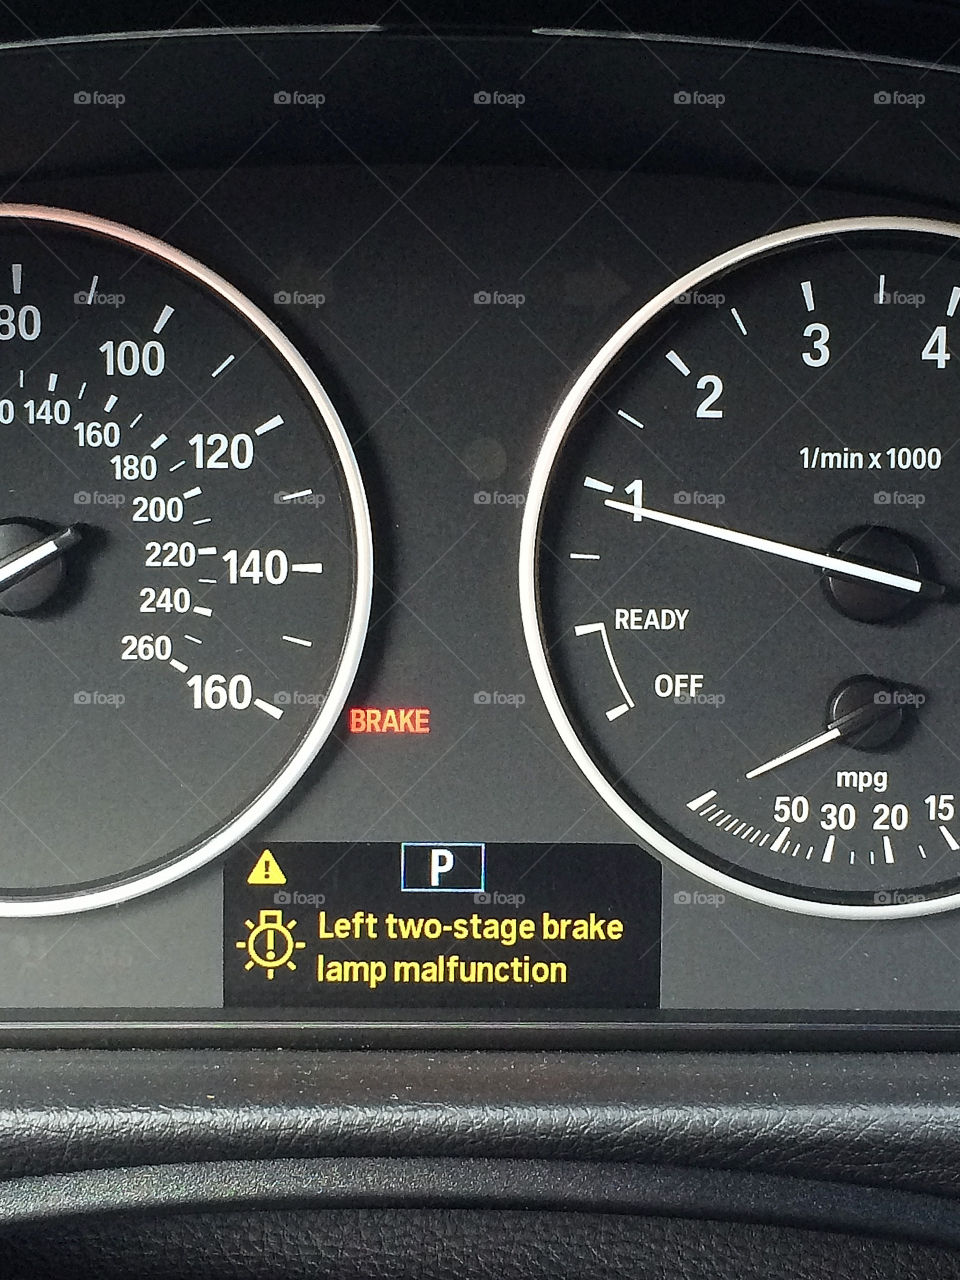 Car problems! There’s nothing fun about getting car malfunction error messages on your dashboard, just like the one I had there. A problem that many of us face!